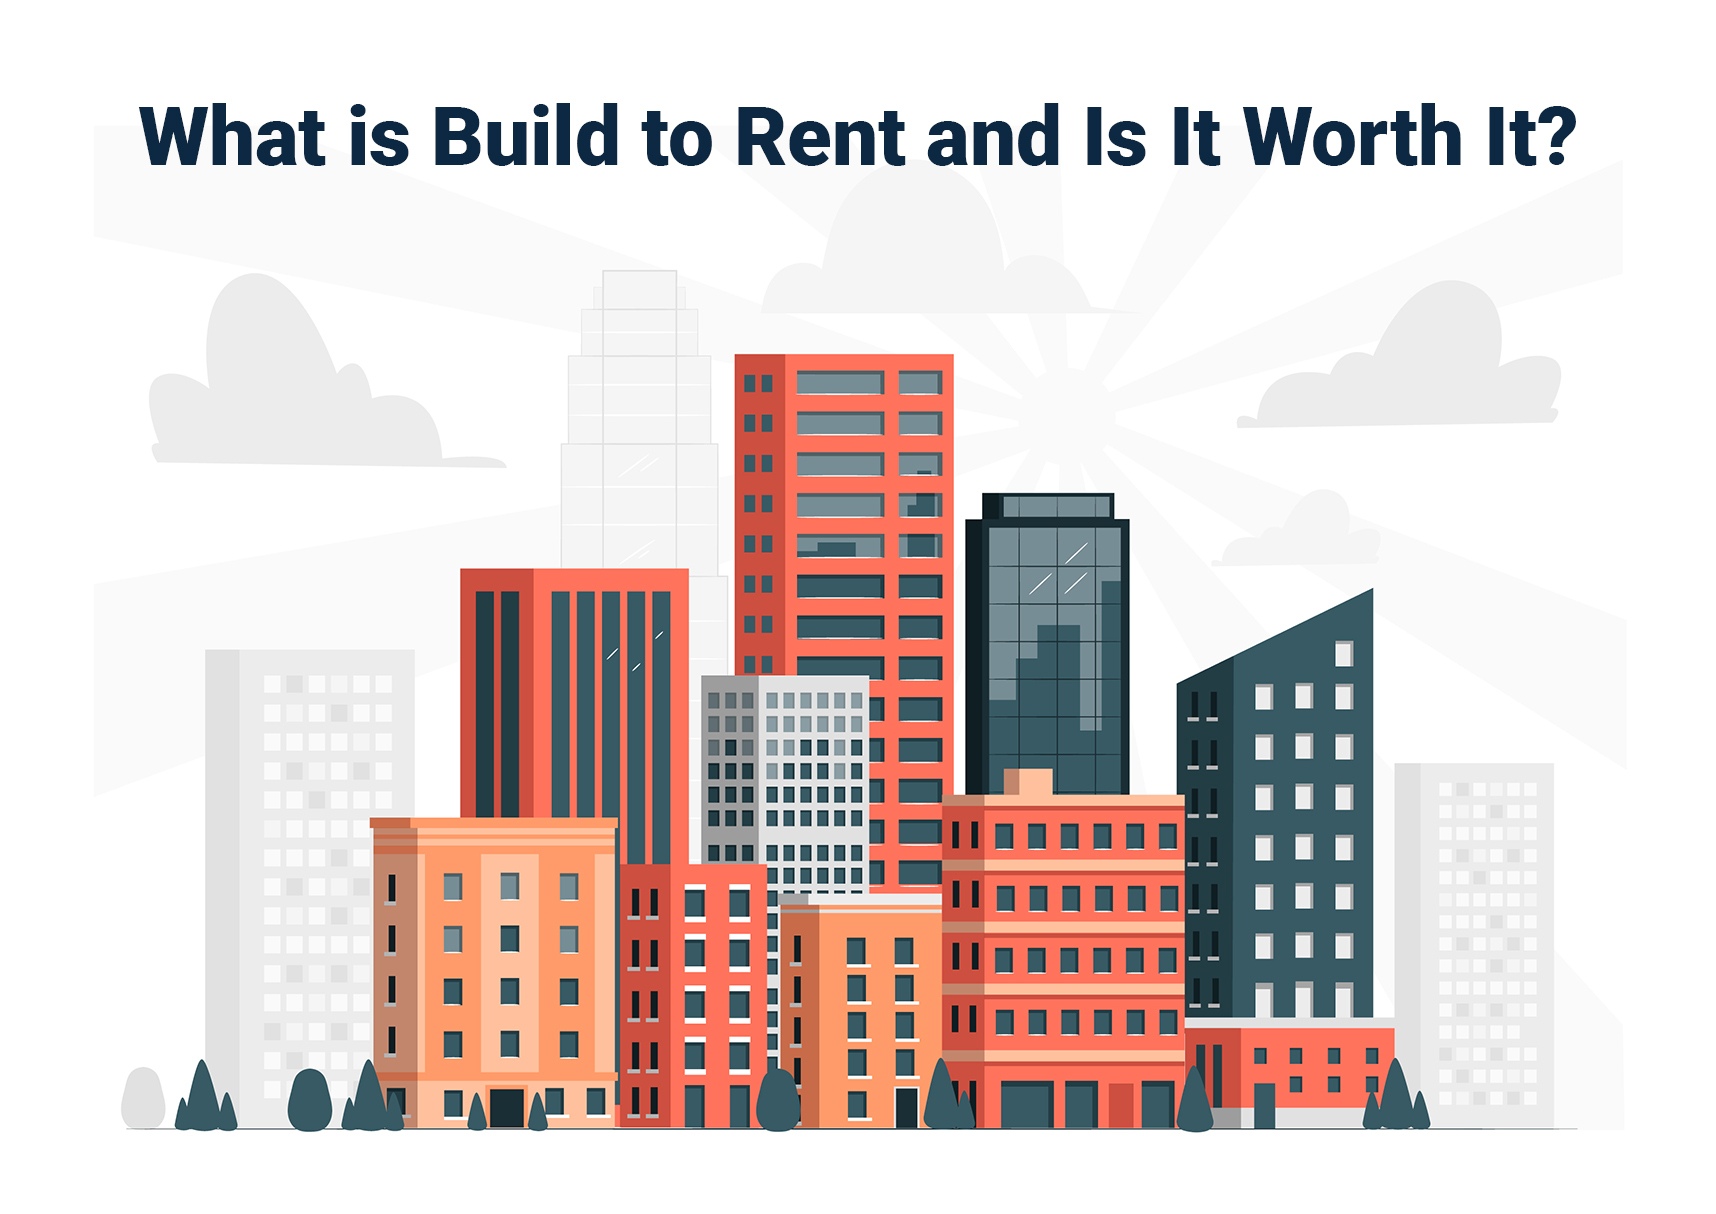 What is Build to Rent and Is It Worth It?